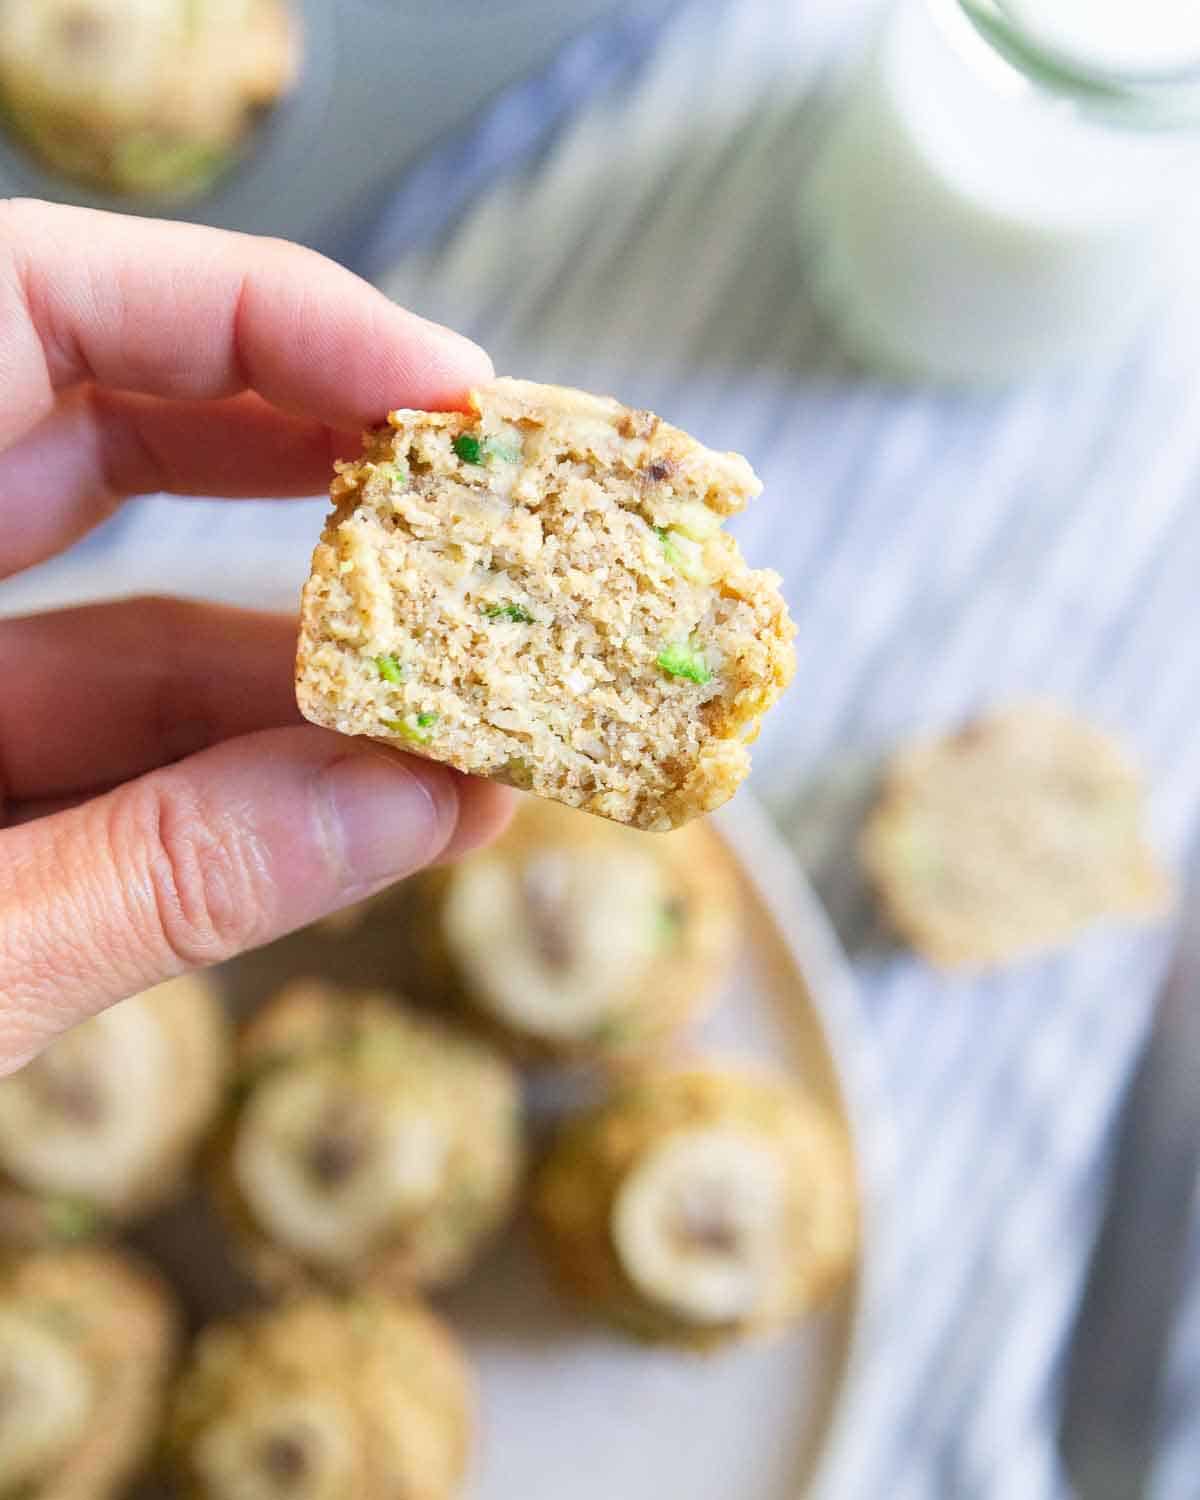 Made with oat and whole wheat flour, banana zucchini muffins are a healthier snack option.